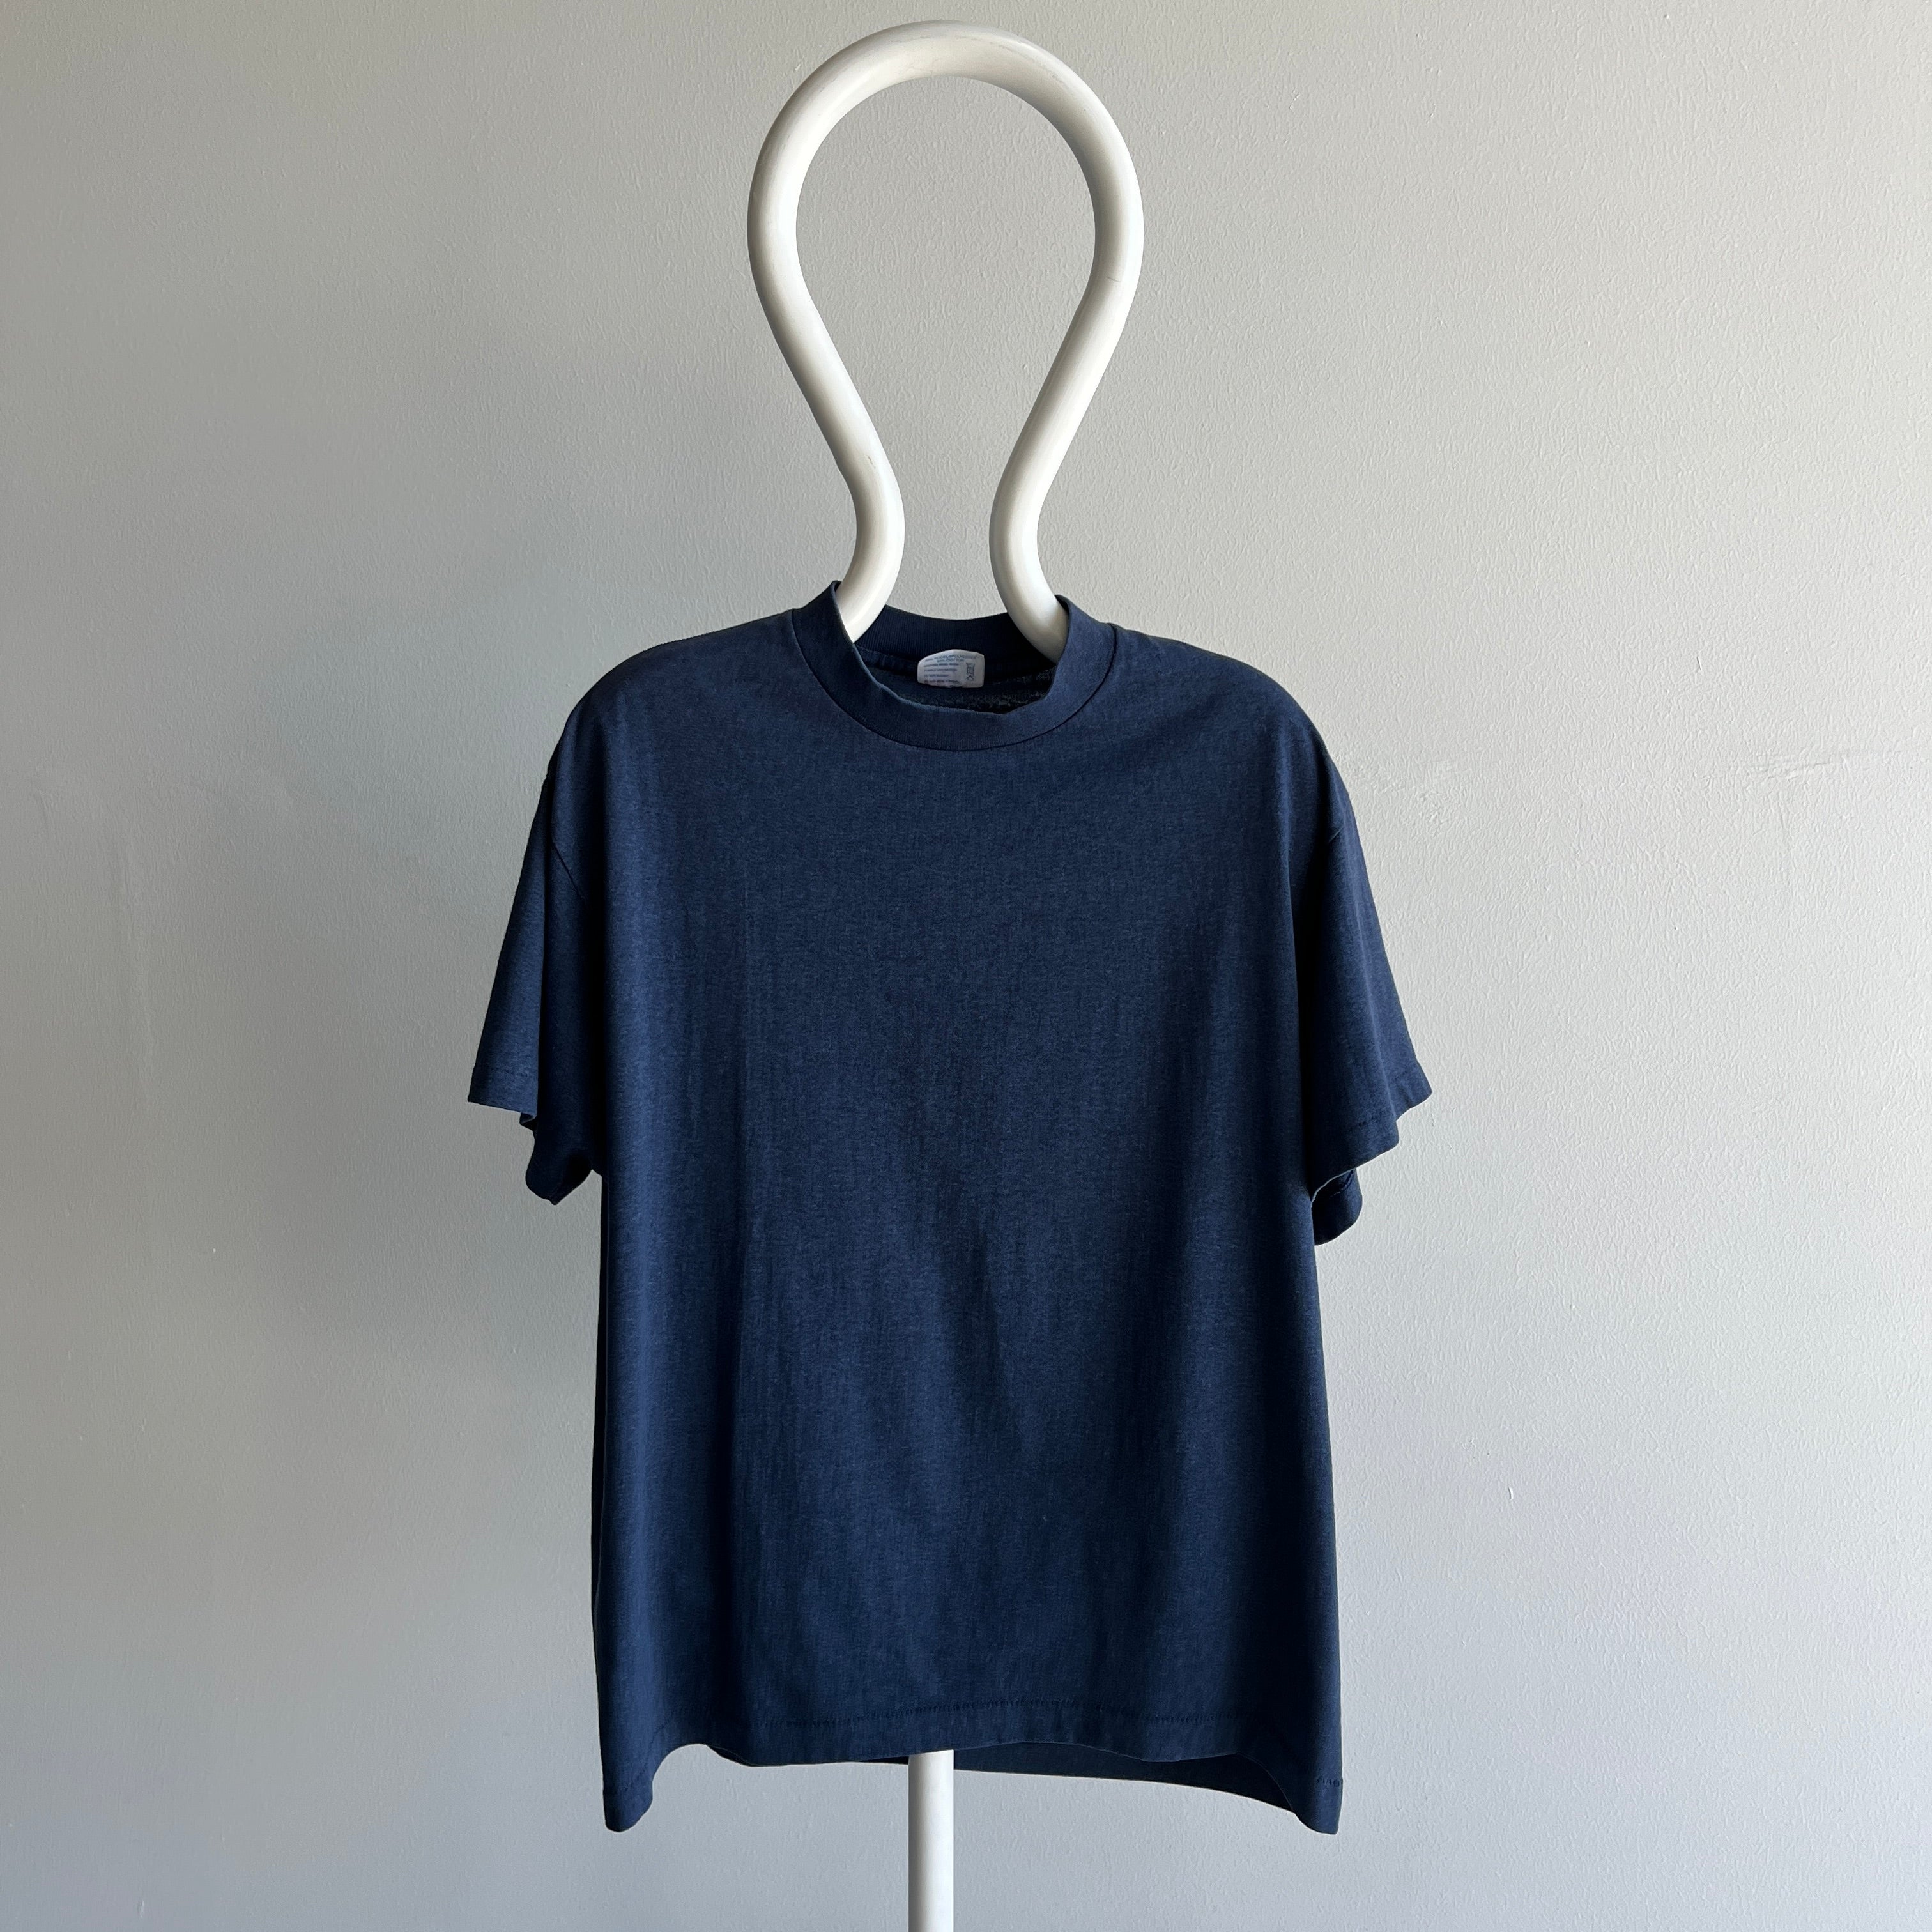 1980s Absolutely Beautiful Blank Navy T-Shirt - Above Average